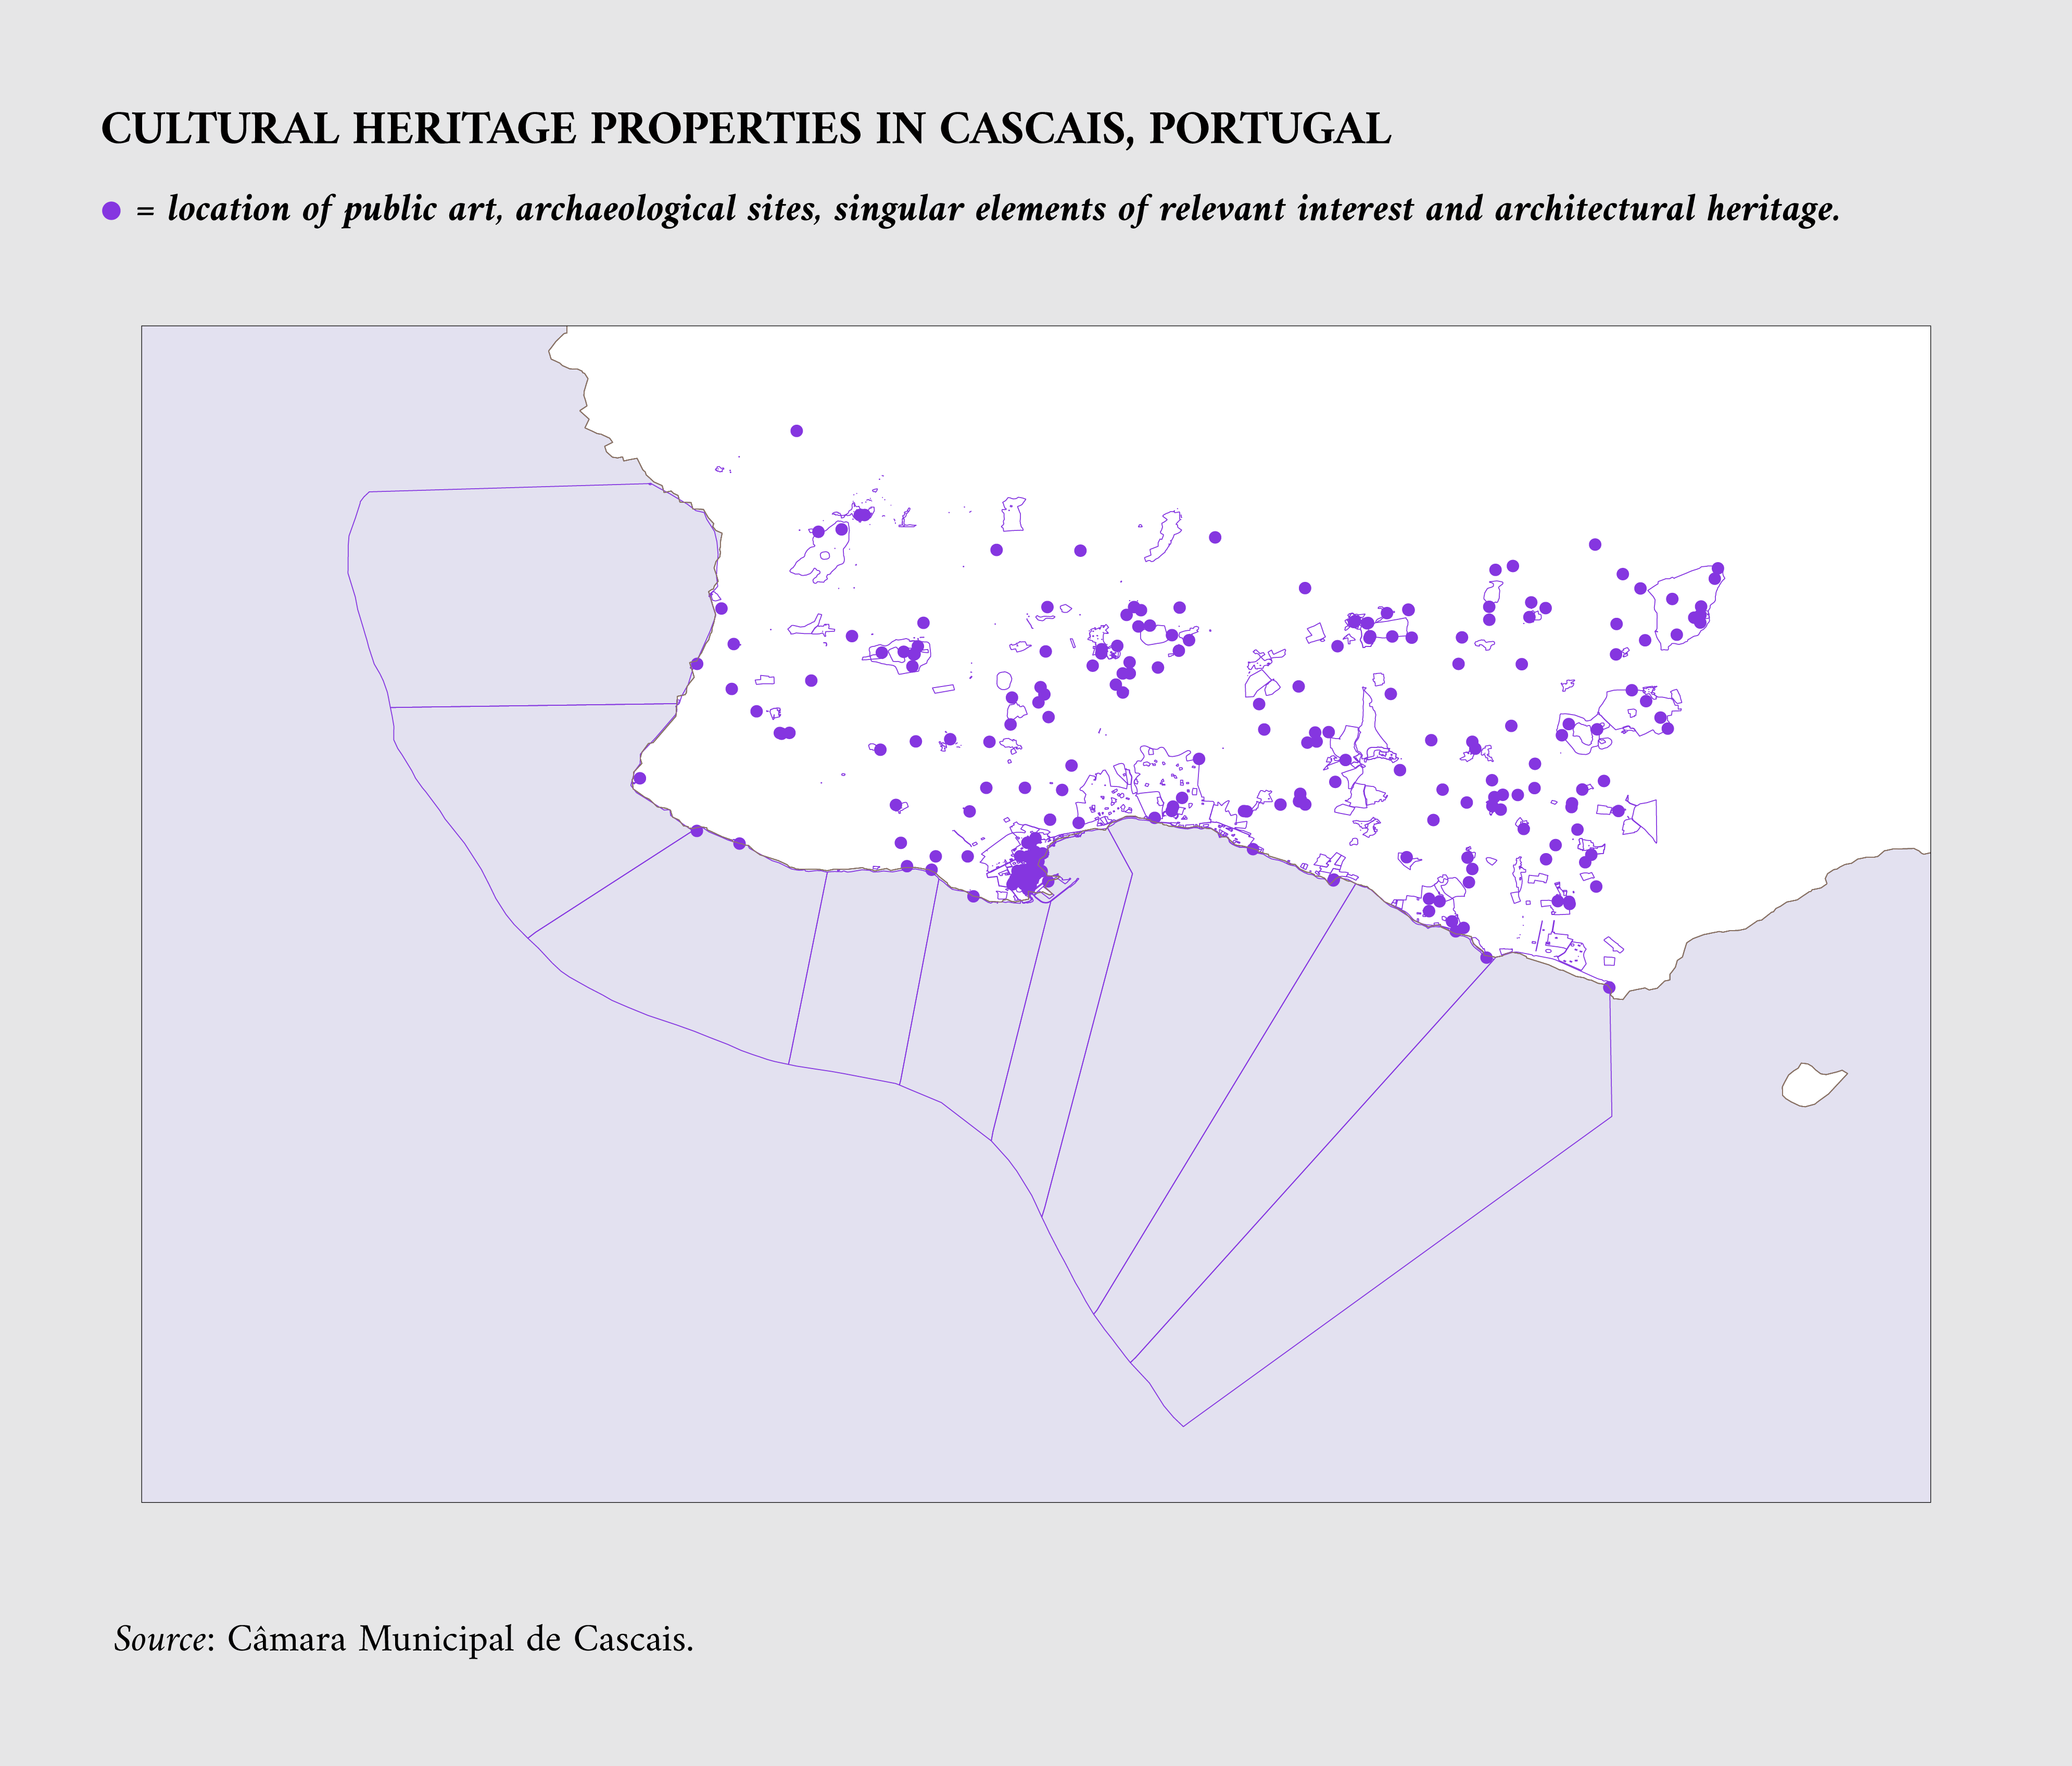 Cultural heritage properties in Cascais, Portugal